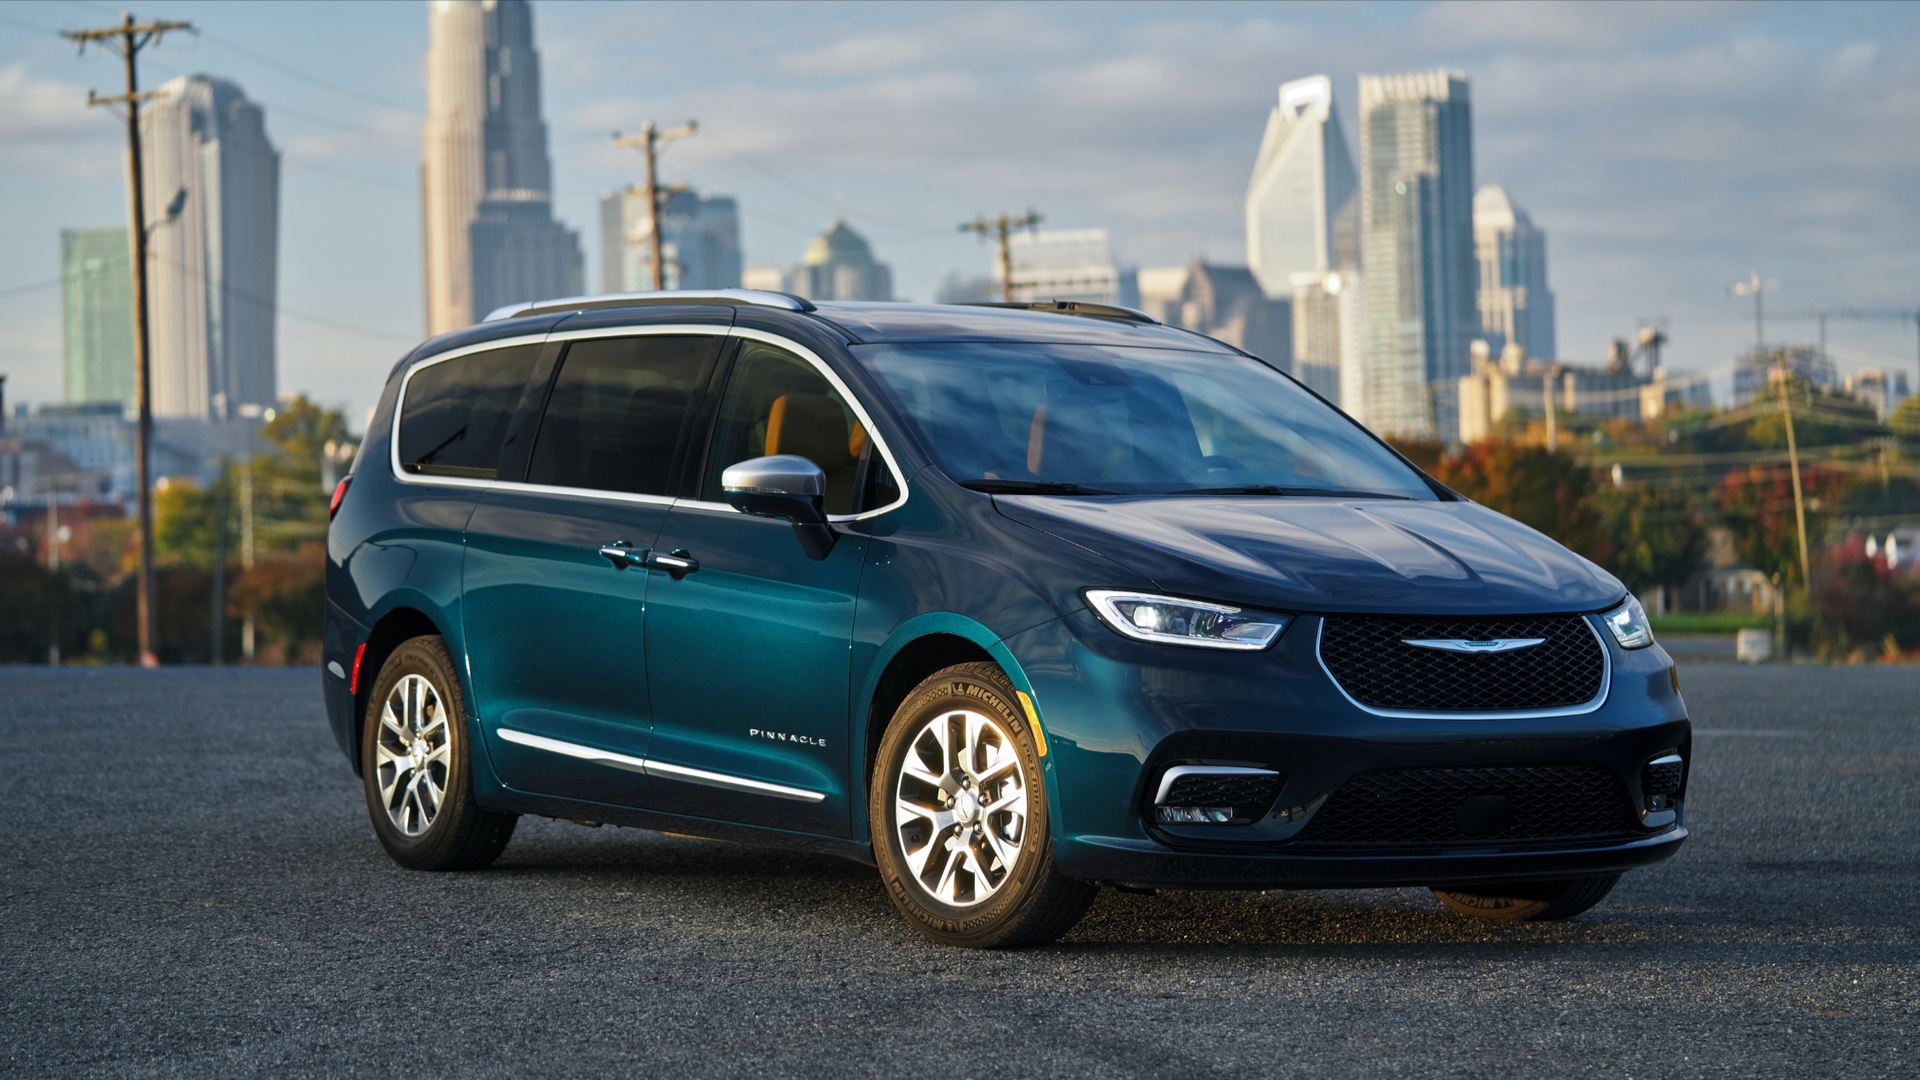 How Reliable Is the Chrysler Pacifica Minivan?